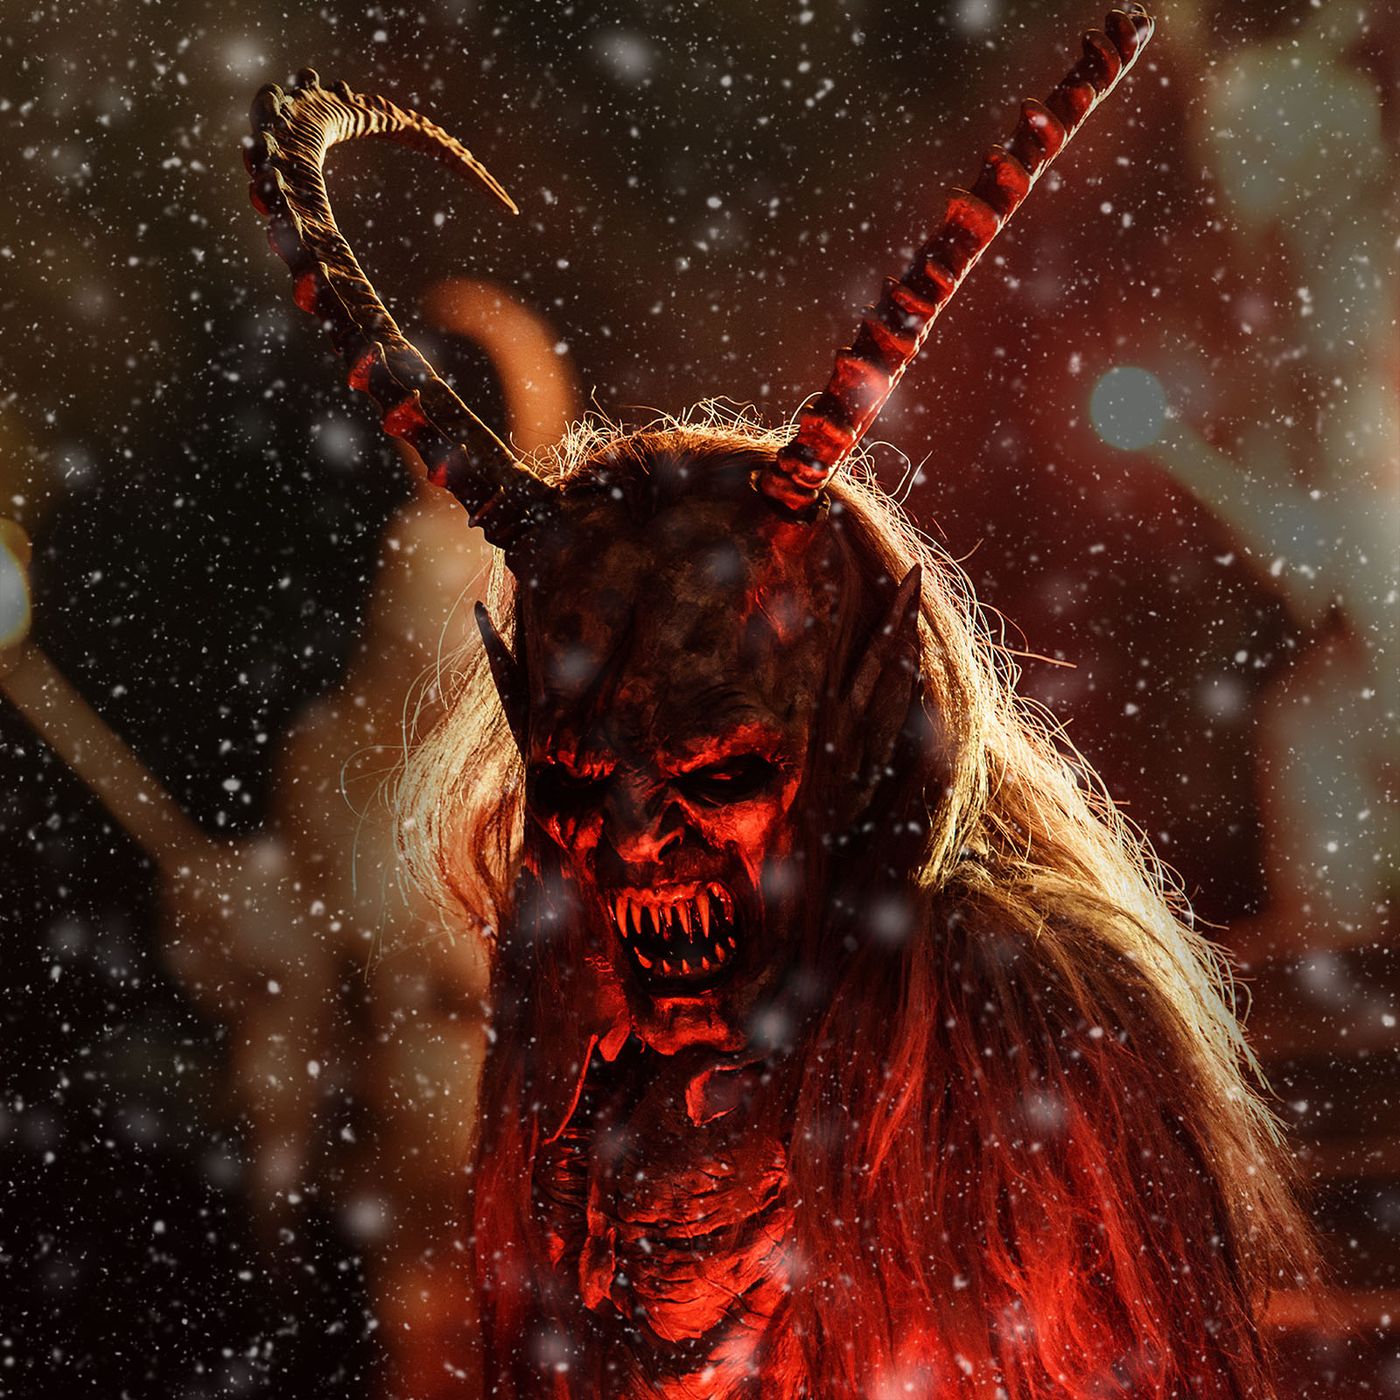 Ep.168 – Krampus is Comin' - This Christmas Spirit Wants BLOOD! Image